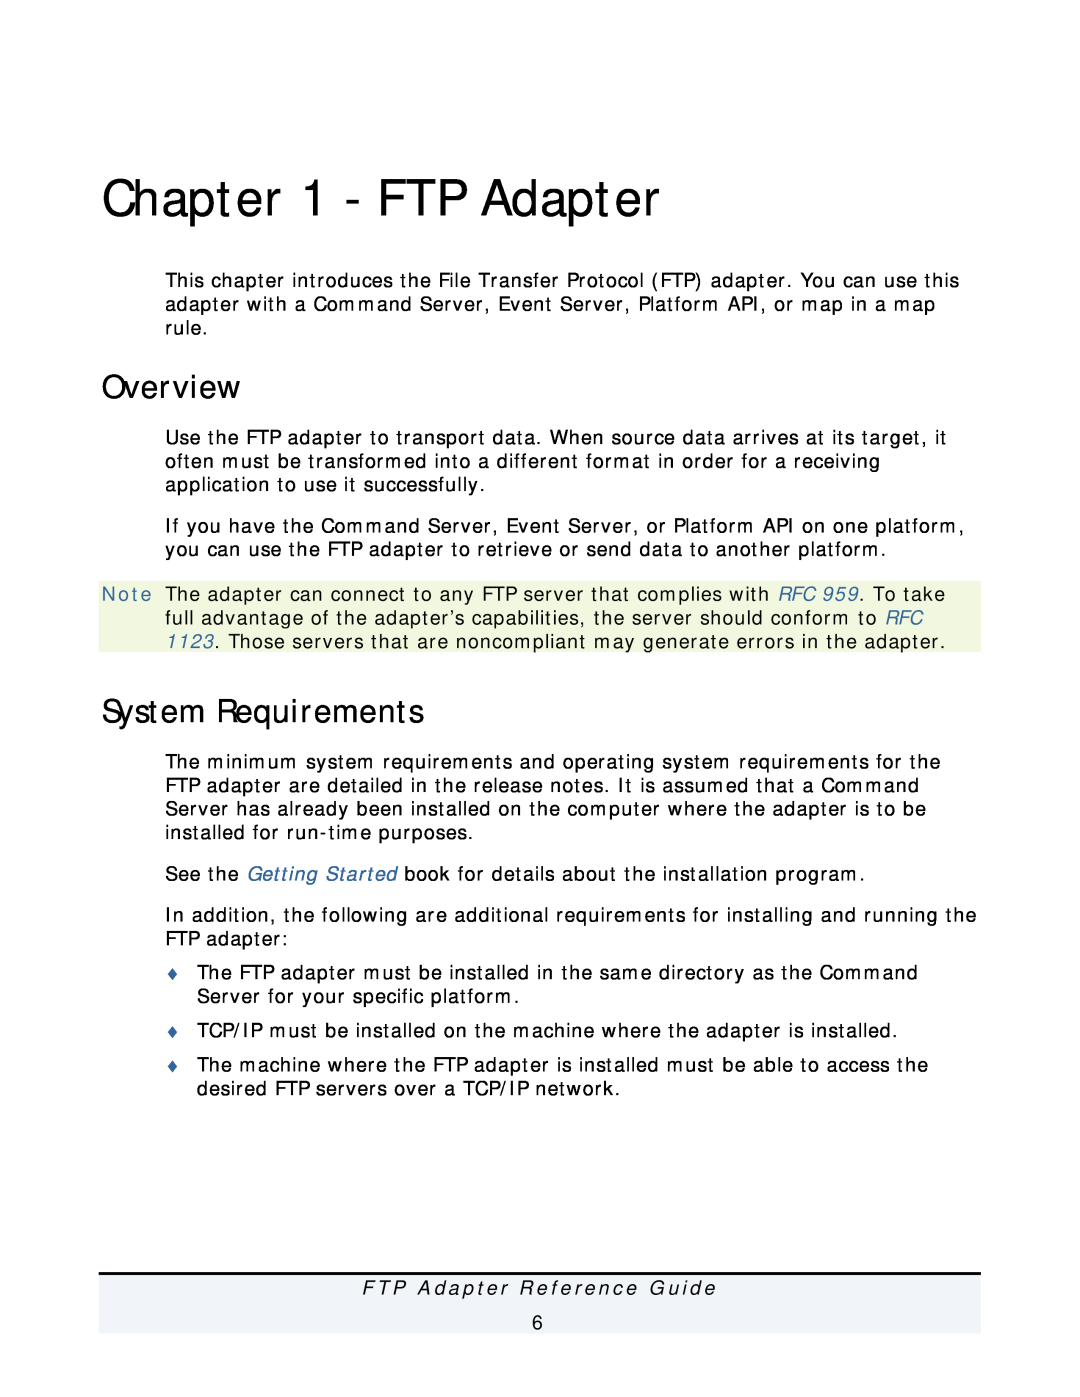 IBM FTP Adapter manual Overview, System Requirements, F T P A d a p t e r R e f e r e n c e G u i d e 